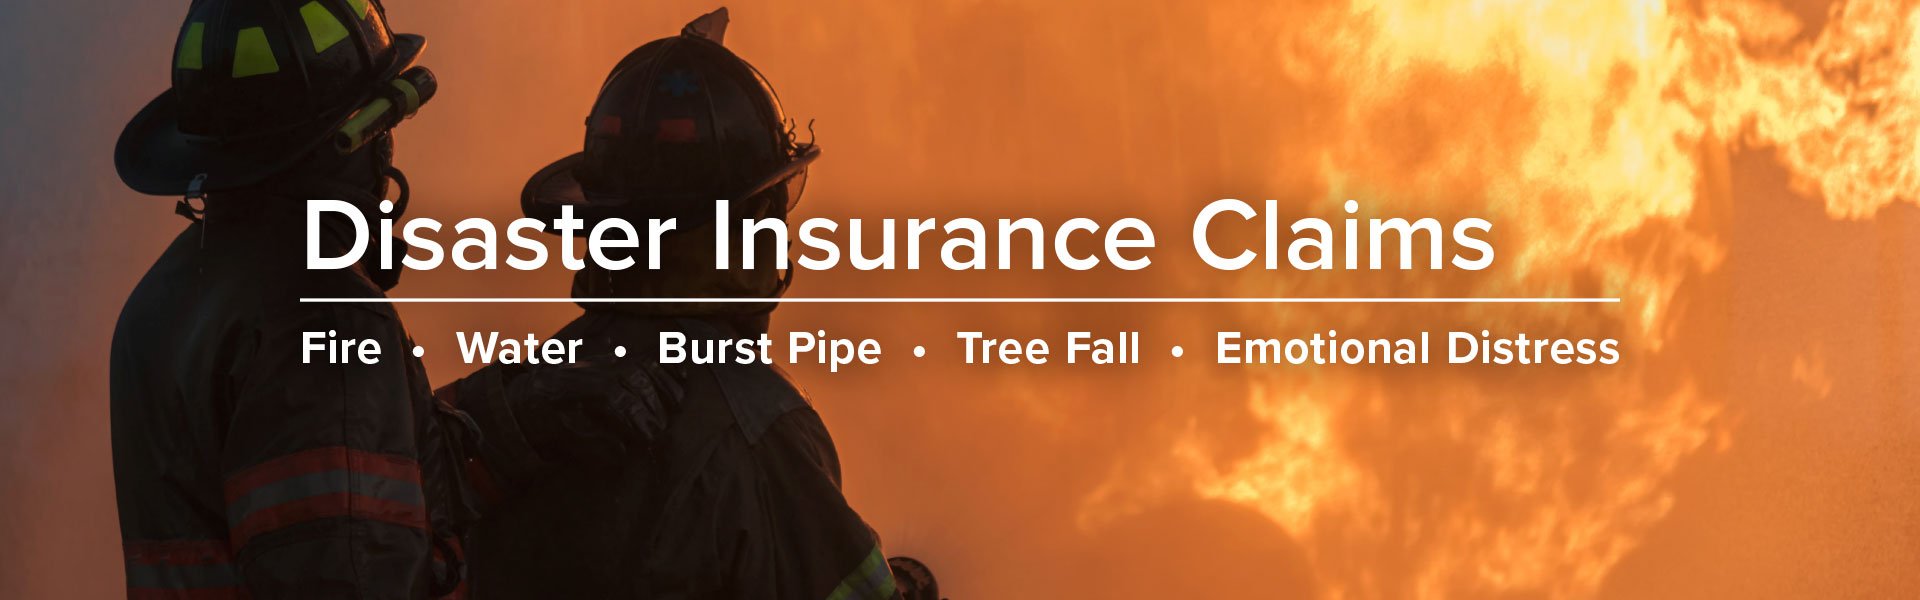 Disaster Insurance Claims: Fire, Water, Burst Pipe, Tree Fall, Emotional Distress